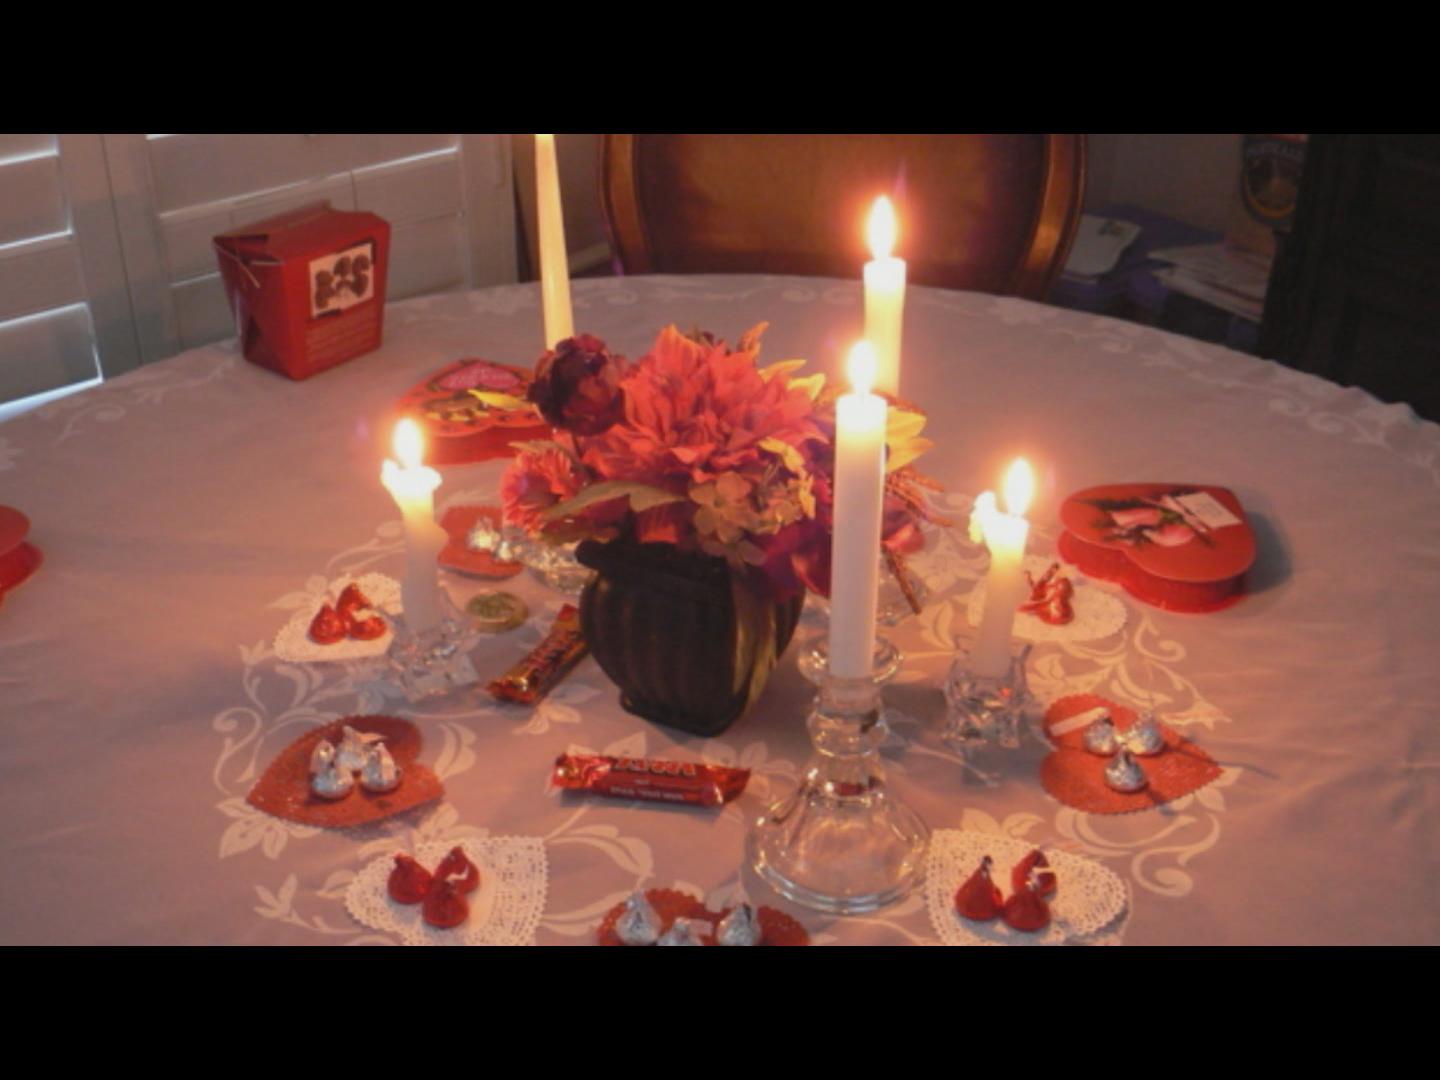 Love Romance: How To Plan a Romantic Dinner at Home for Your Spouse